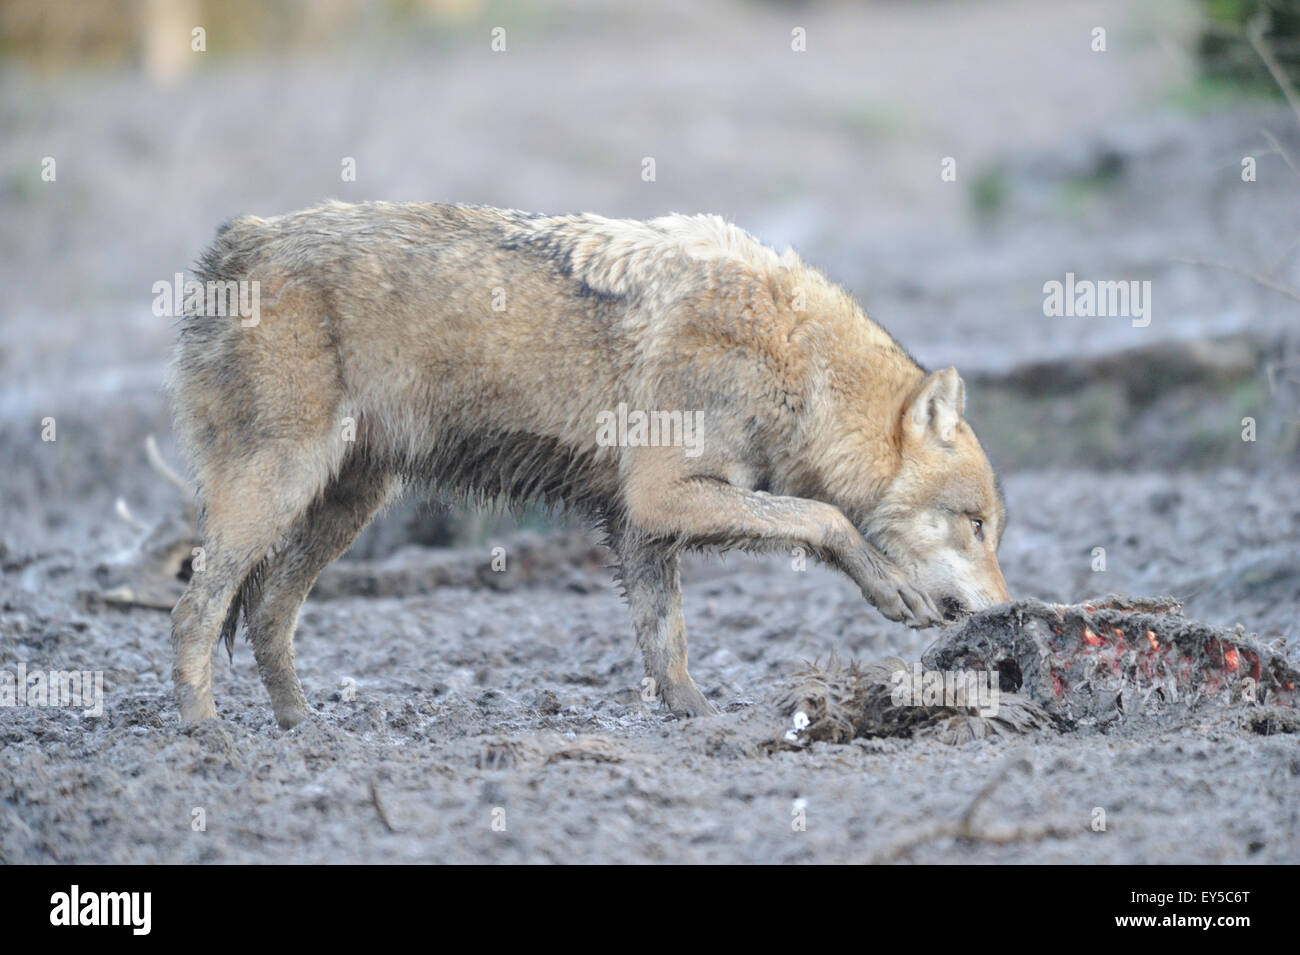 Gray wolf devouring a carcass Stock Photo